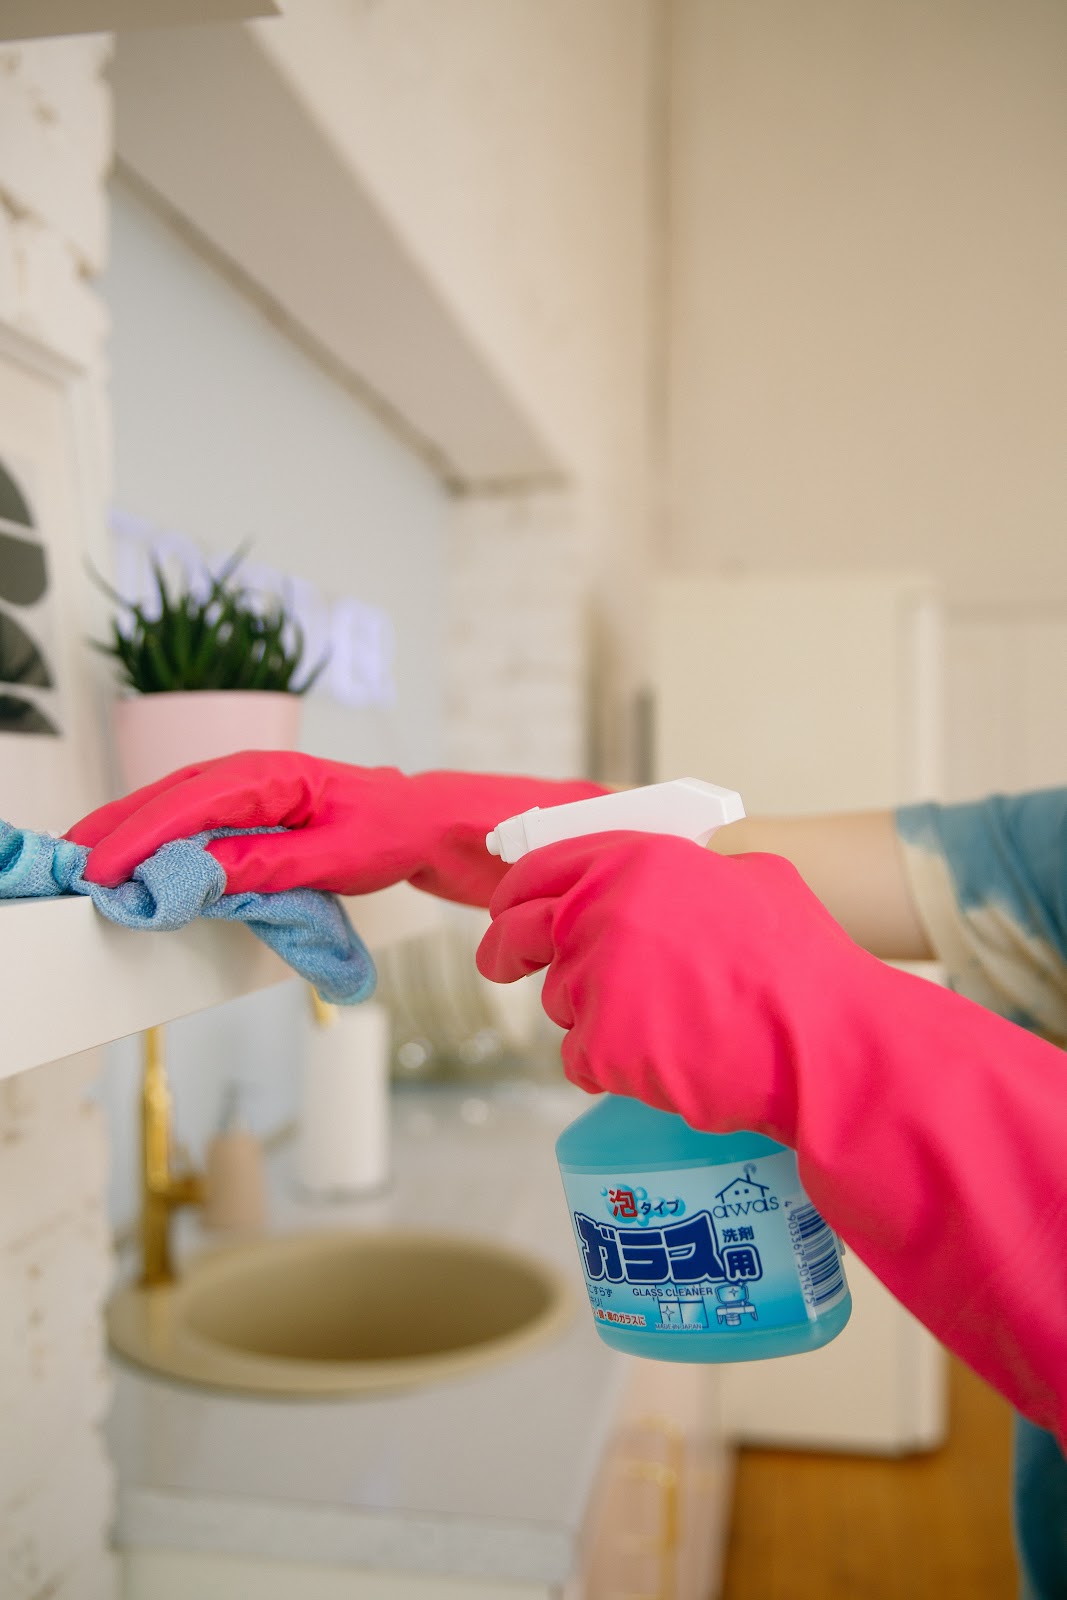 service worker in gloves washes furniture.